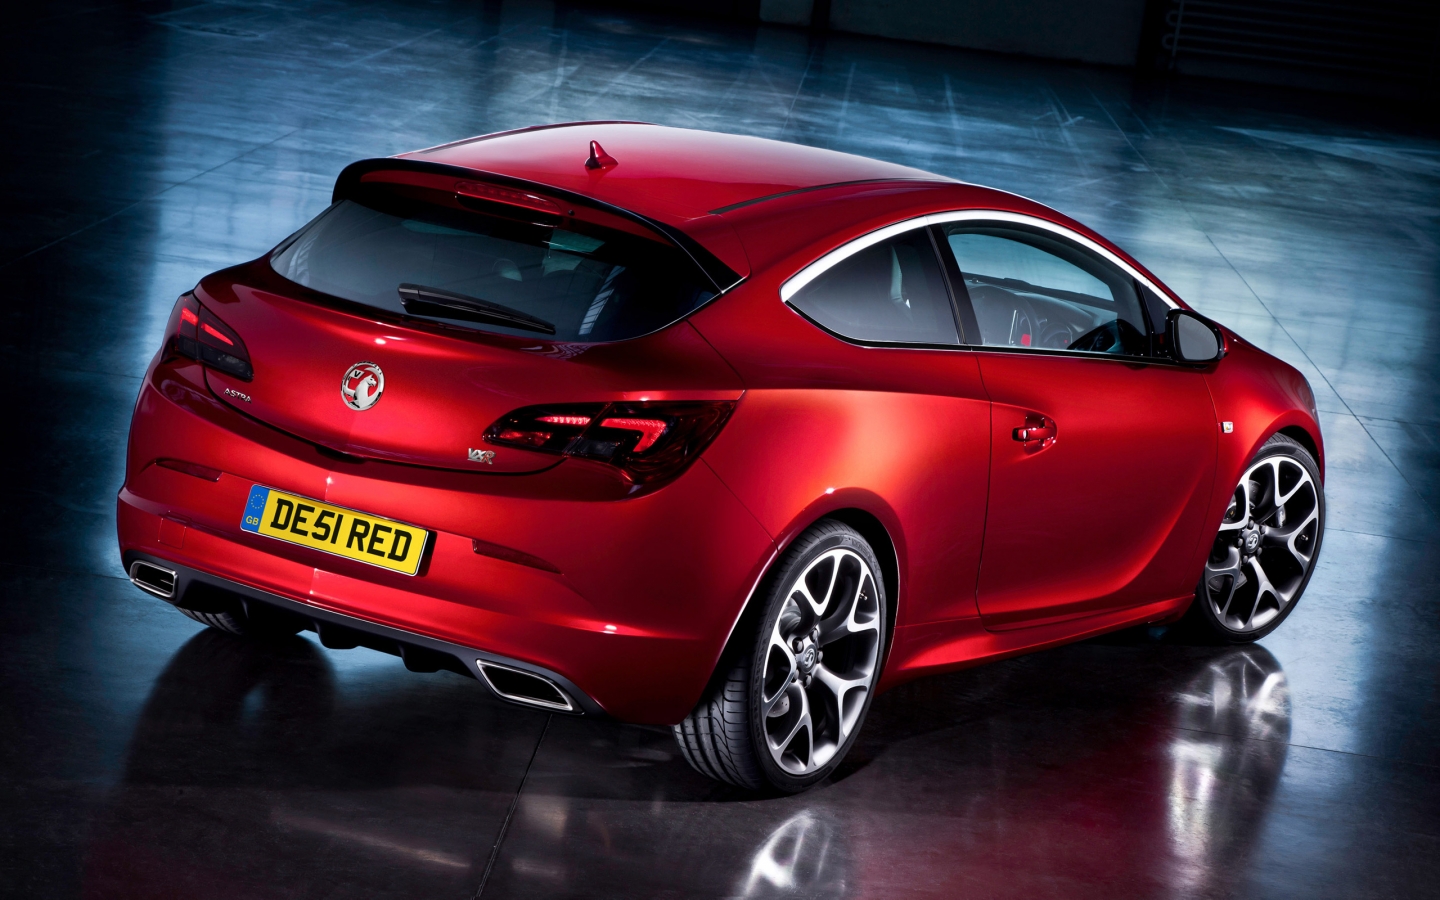 Vauxhall Astra GTC Rear for 1440 x 900 widescreen resolution